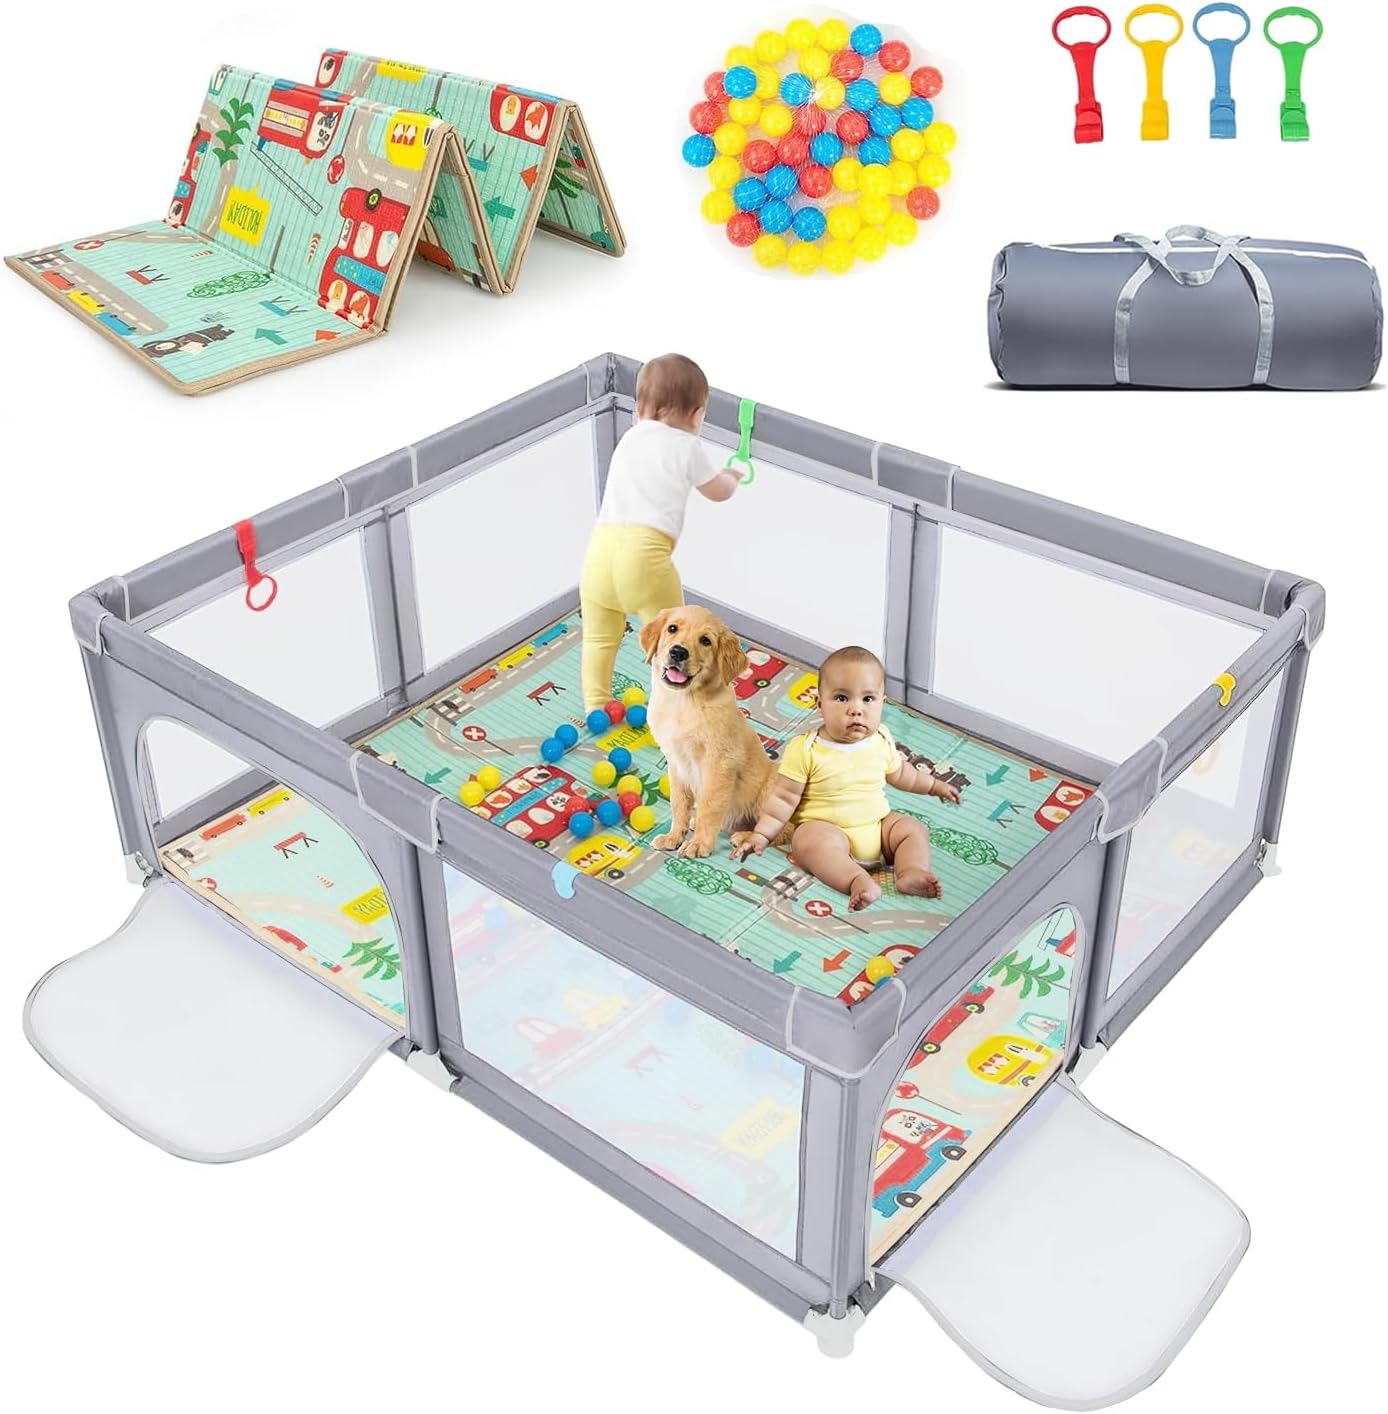 Extra Large Baby Toddler Playpen with Storage Bag Ocean Balls Pull Rings and Mat